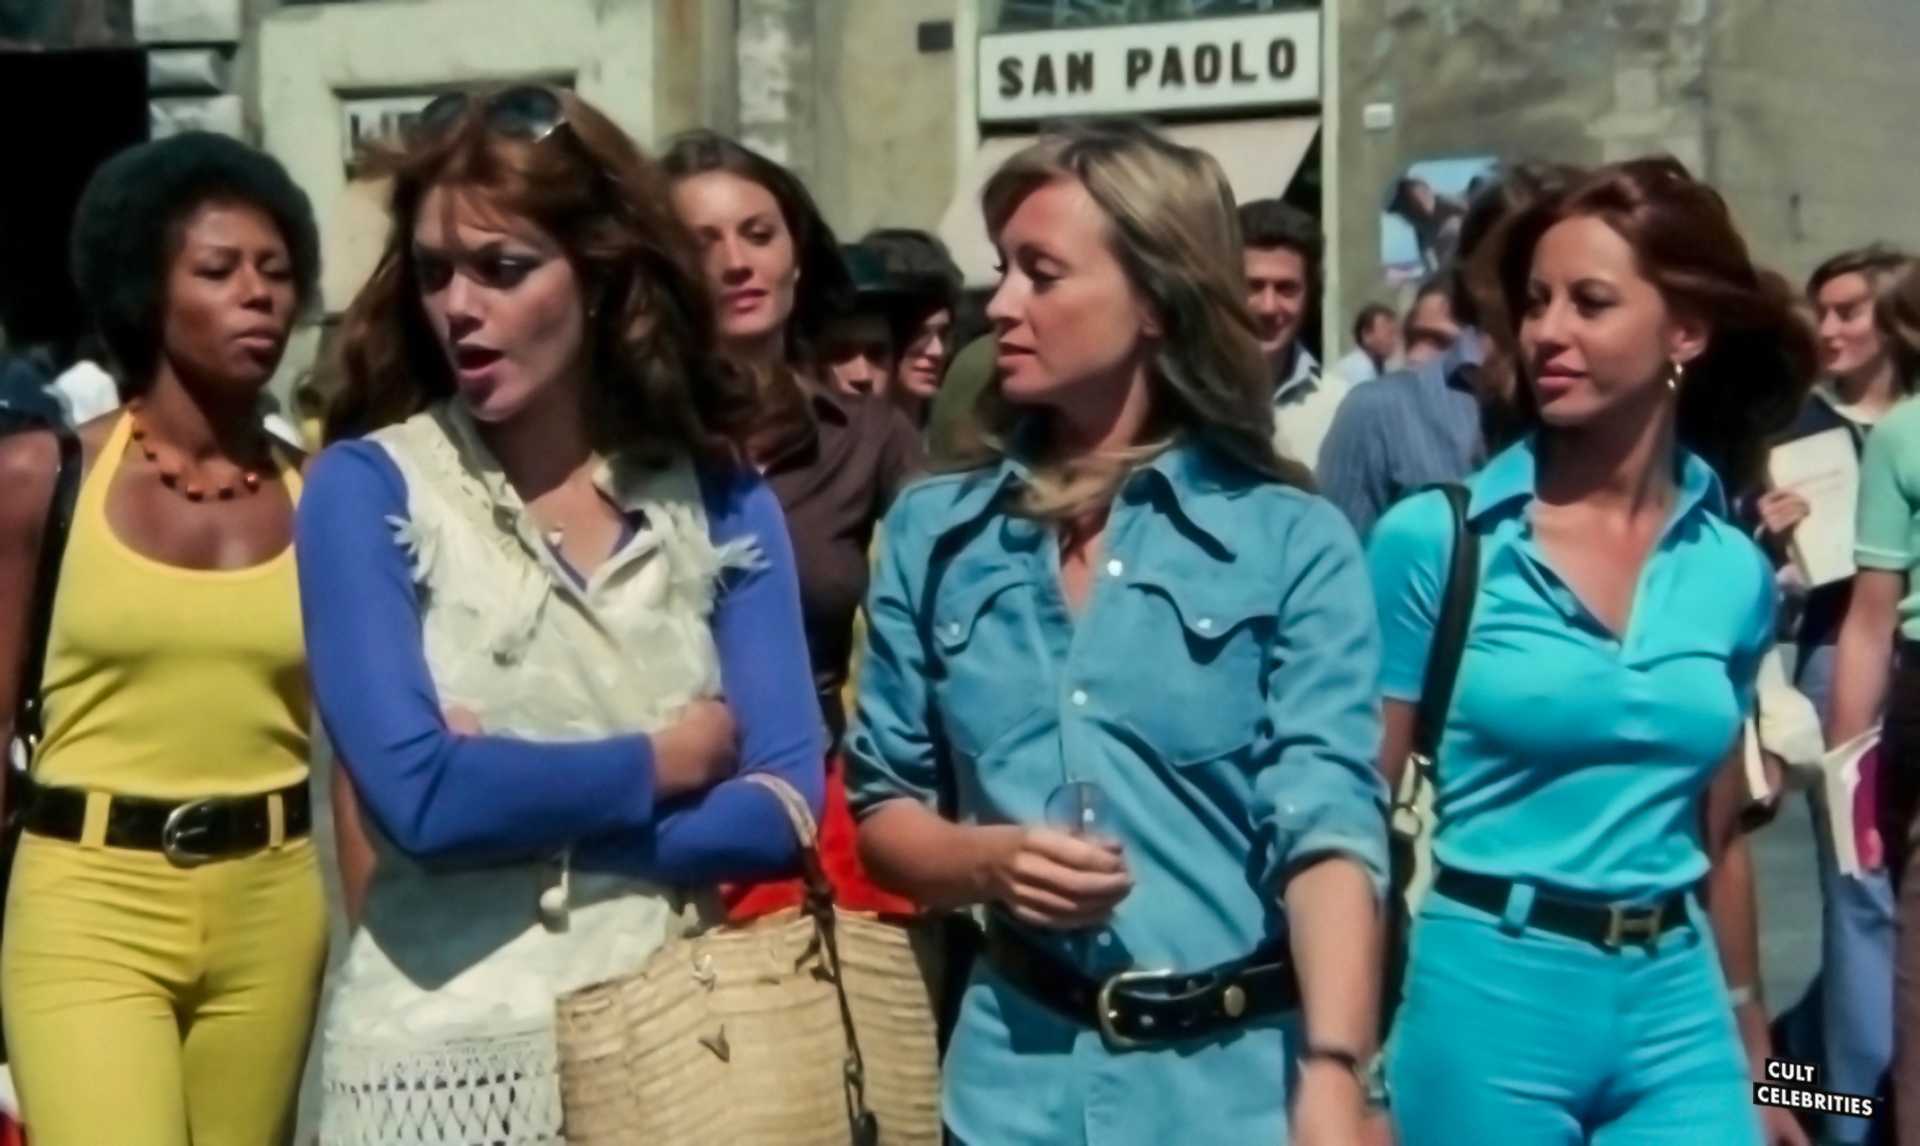 Angela Covello, Carla Brait, Suzy Kendall and Tina Aumont in Torso (1973)